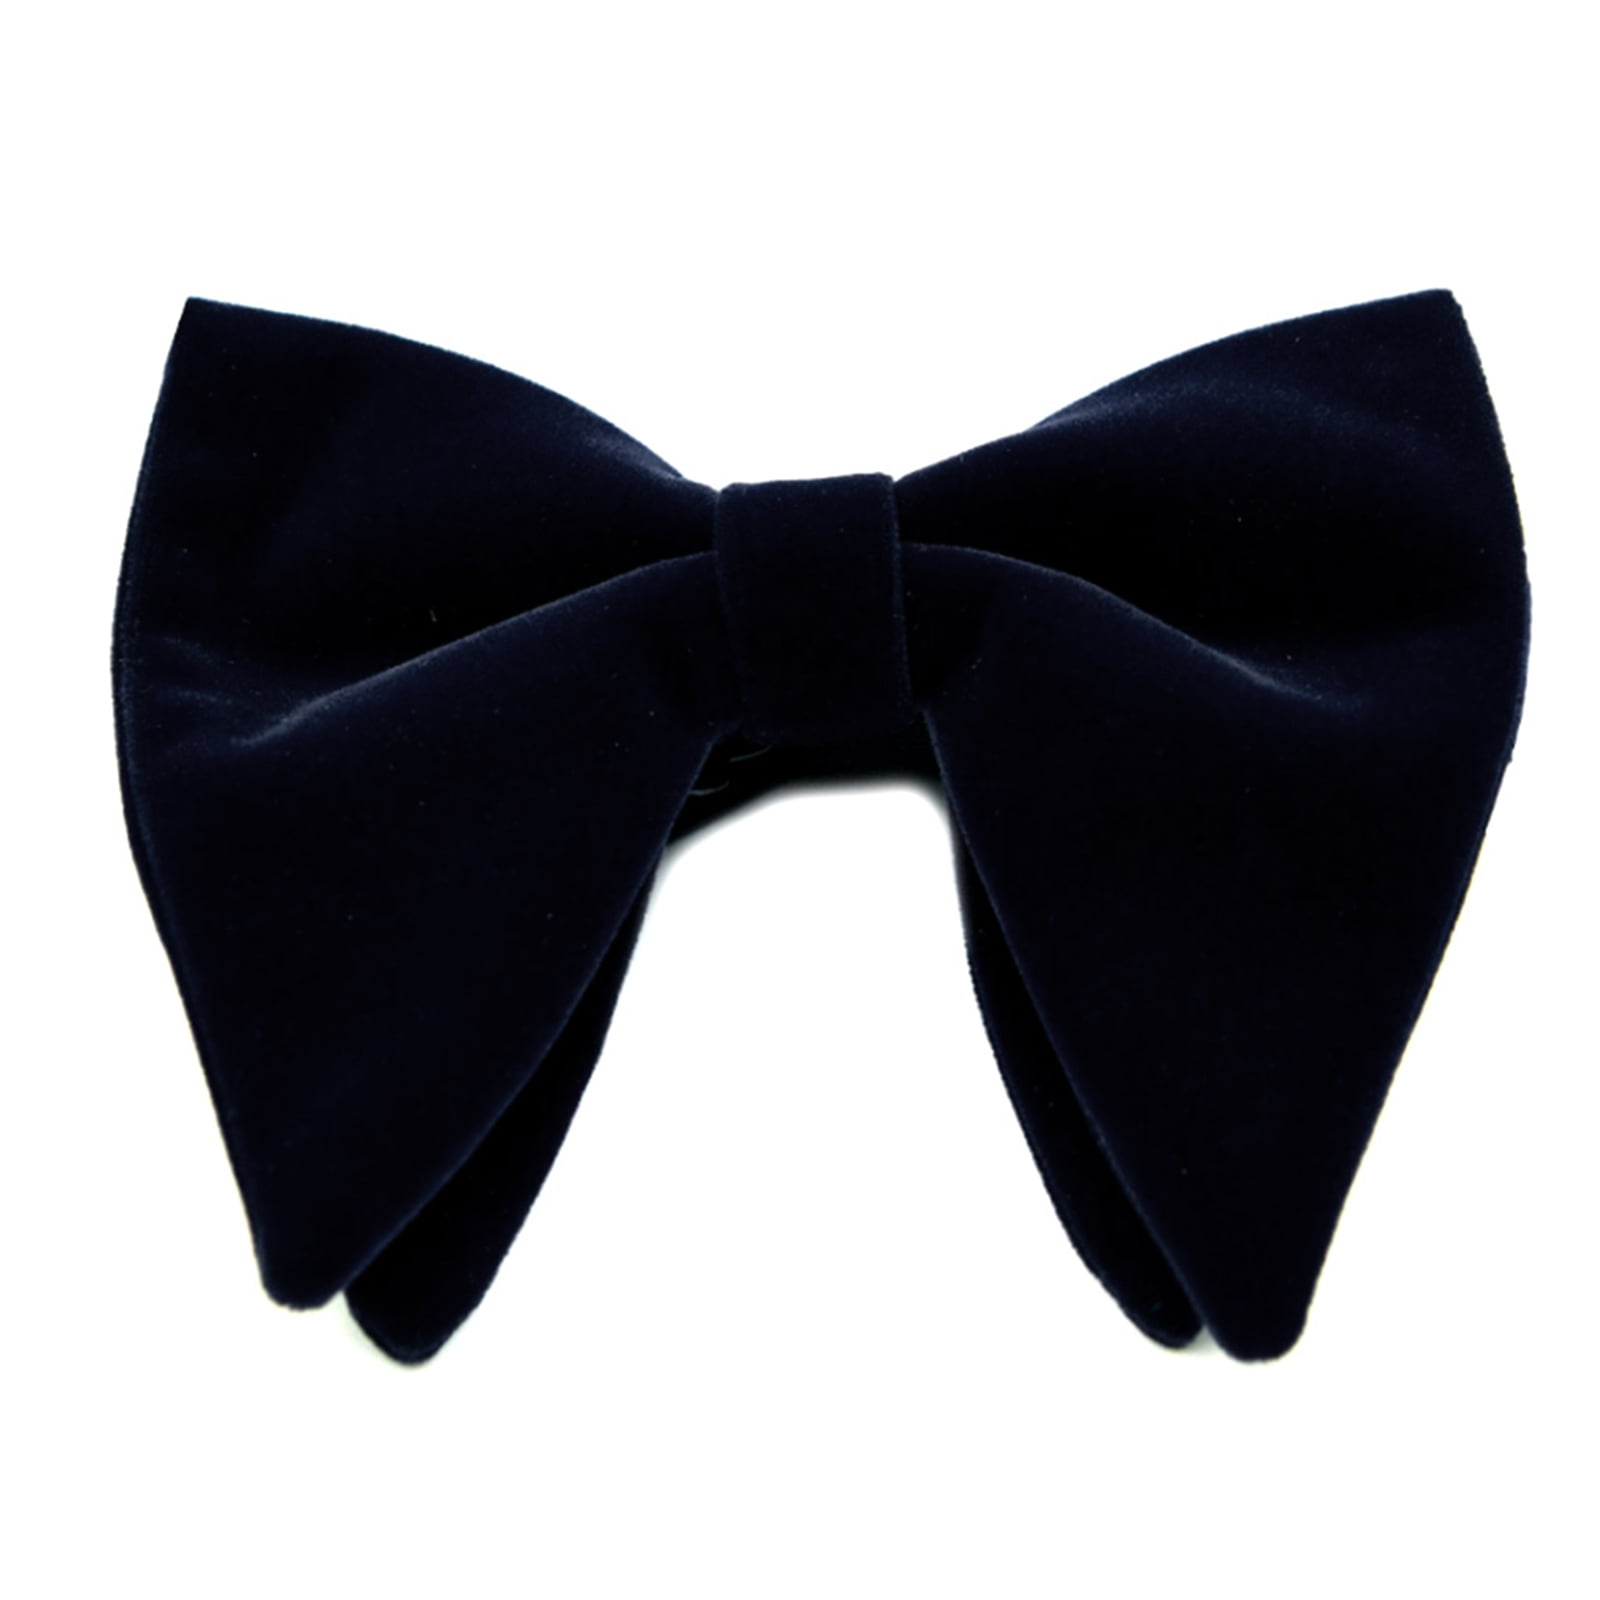 Music Notes Bow Tie Mens Bowtie Pre-Tied Adjustable Length Birthday Gift Formal Fun Occasions 